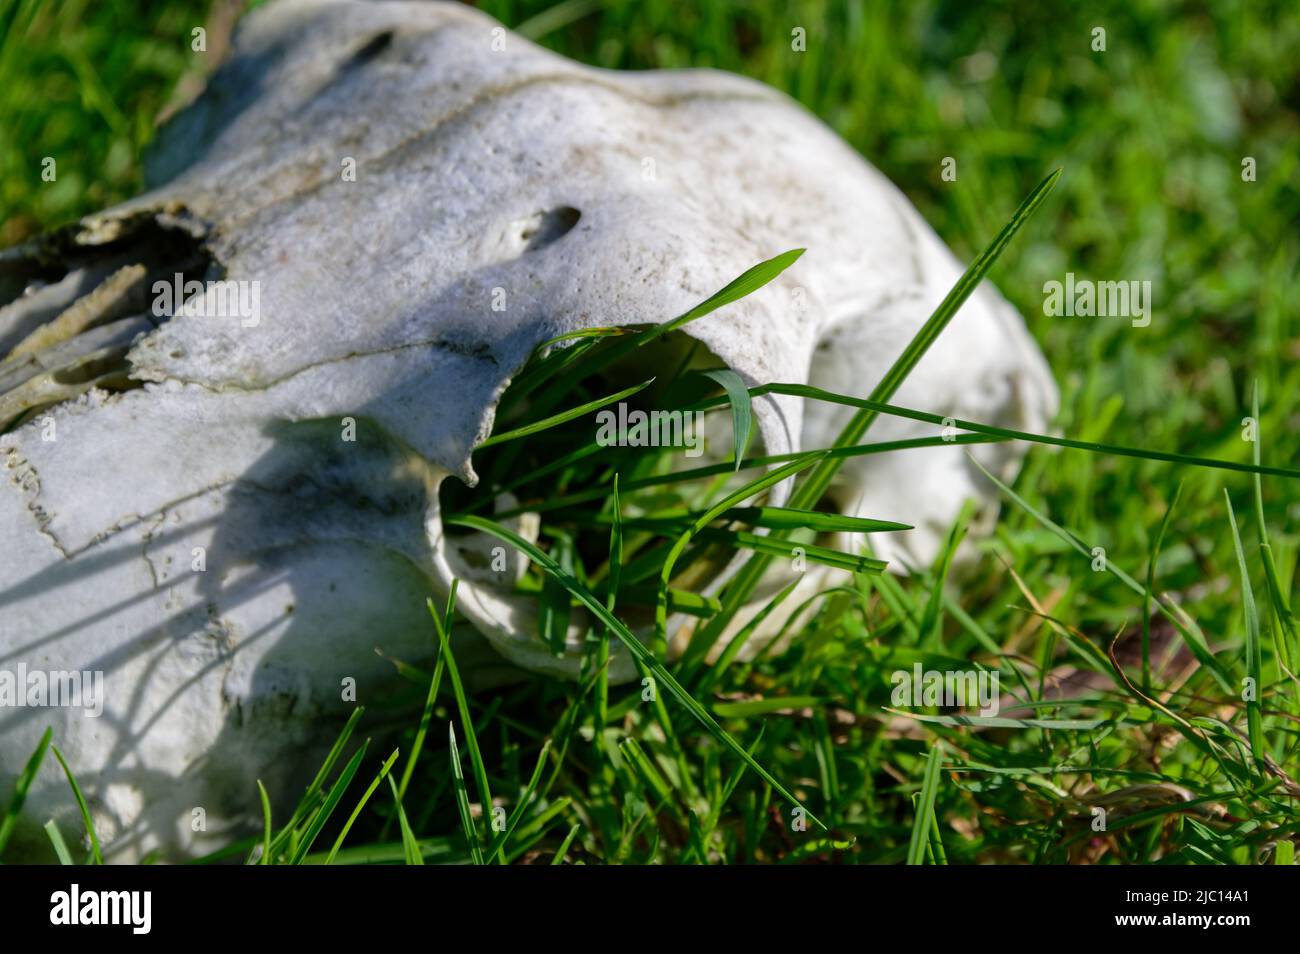 Grass is growing out of the eye socket of an animal skull demonstrating the cycle of life as the skull is broken down naturally. Stock Photo